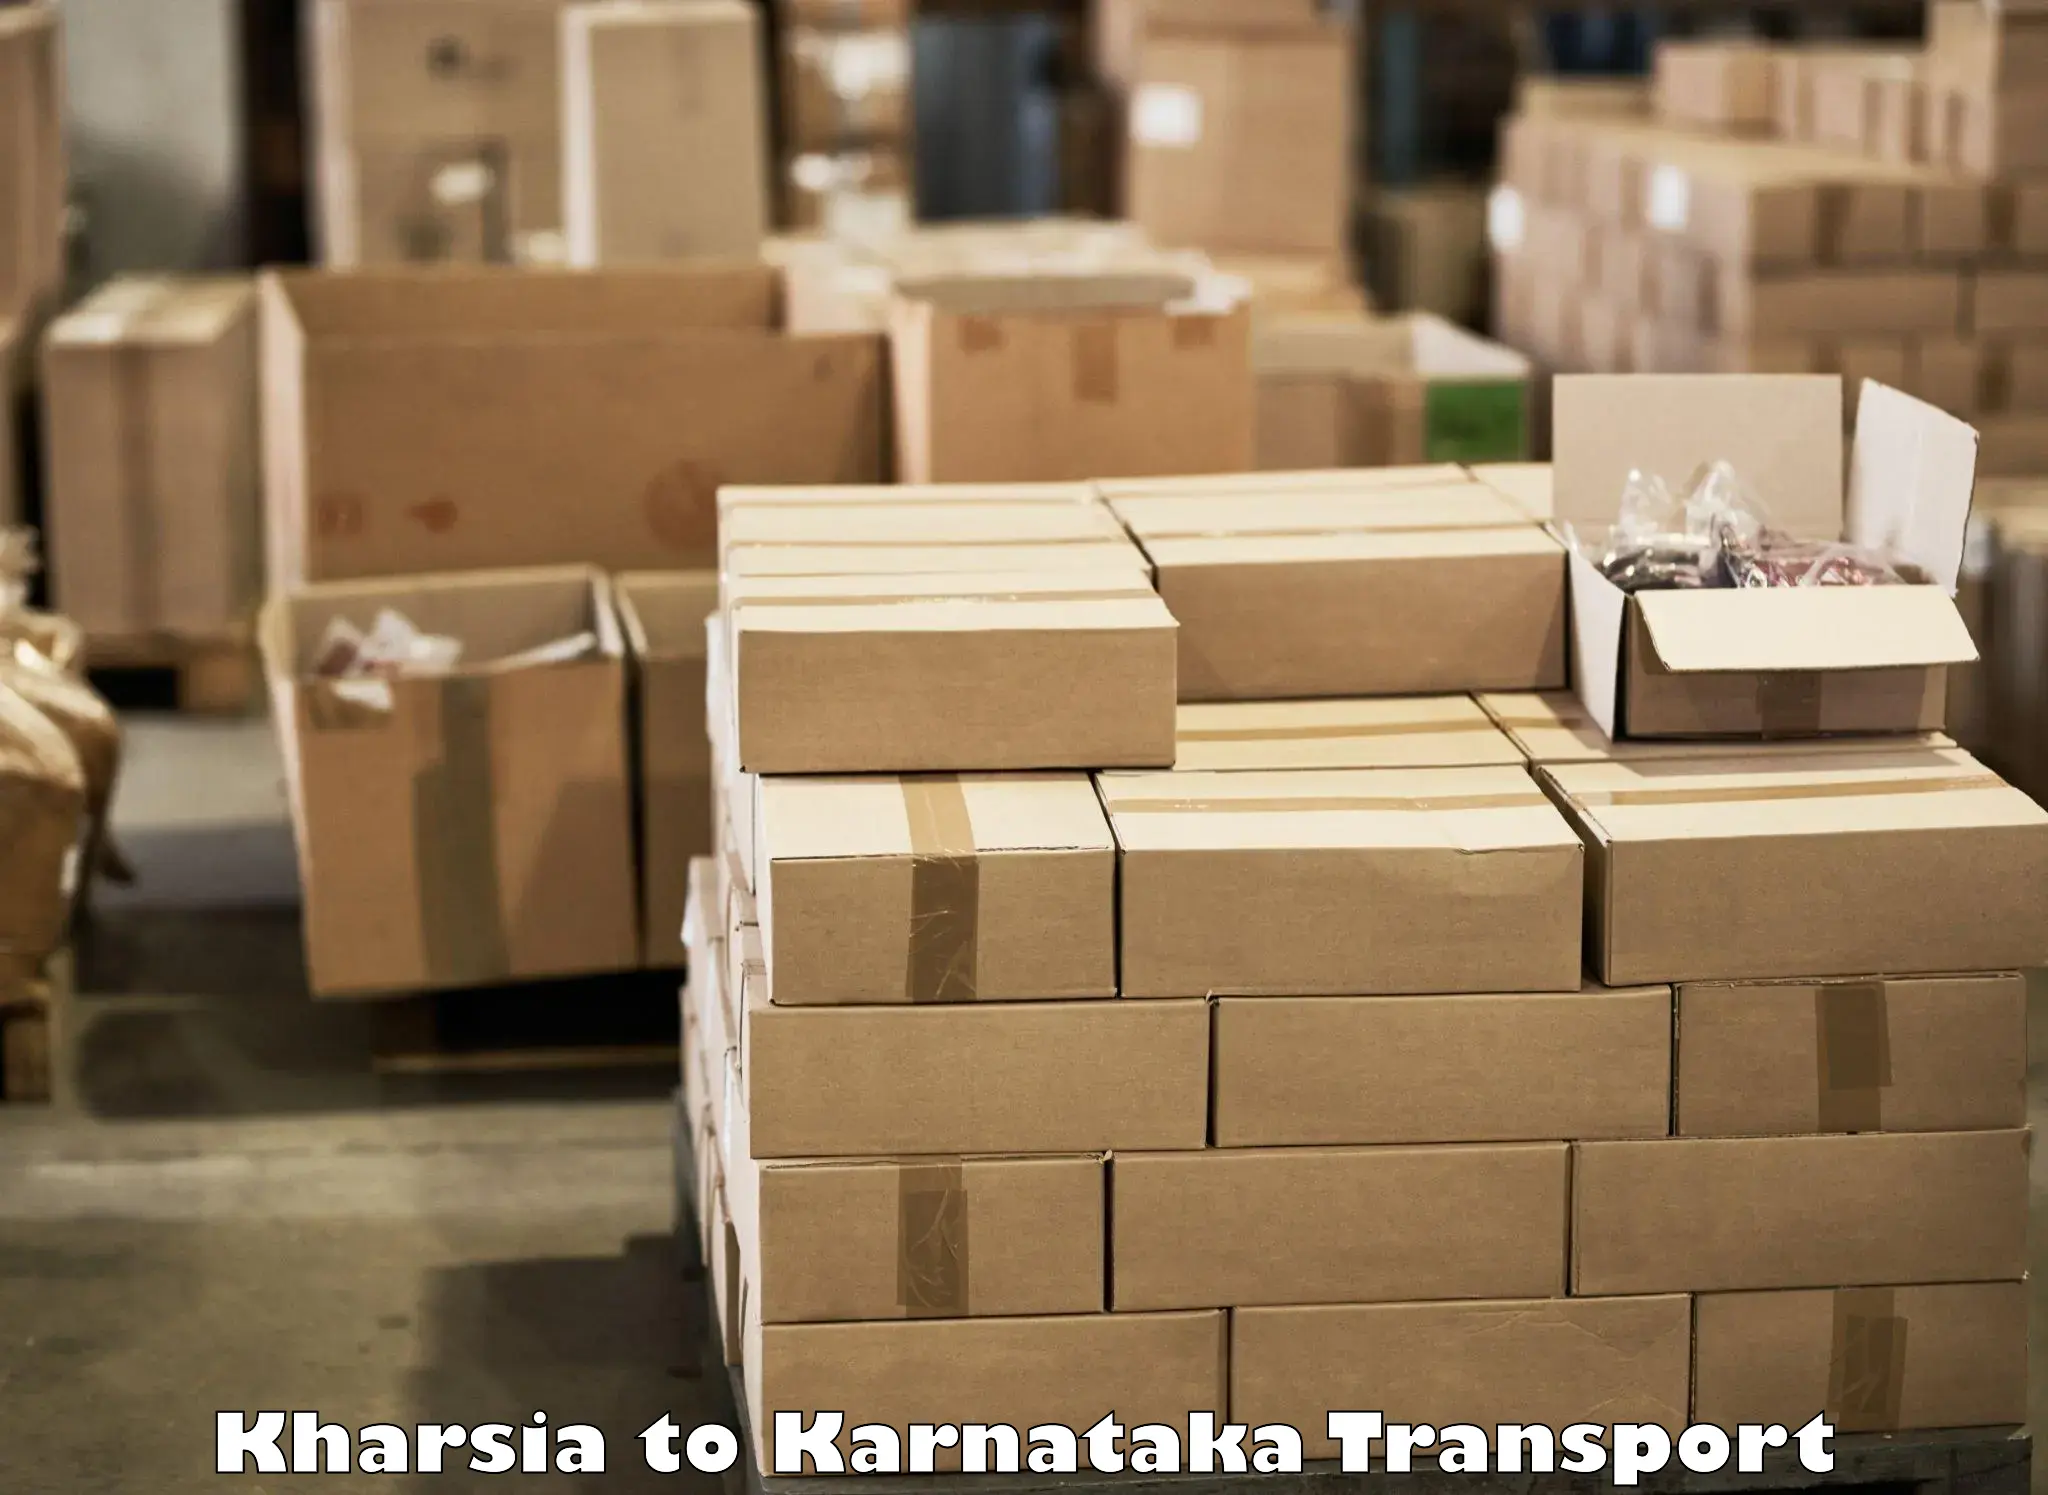 Truck transport companies in India Kharsia to Holalu